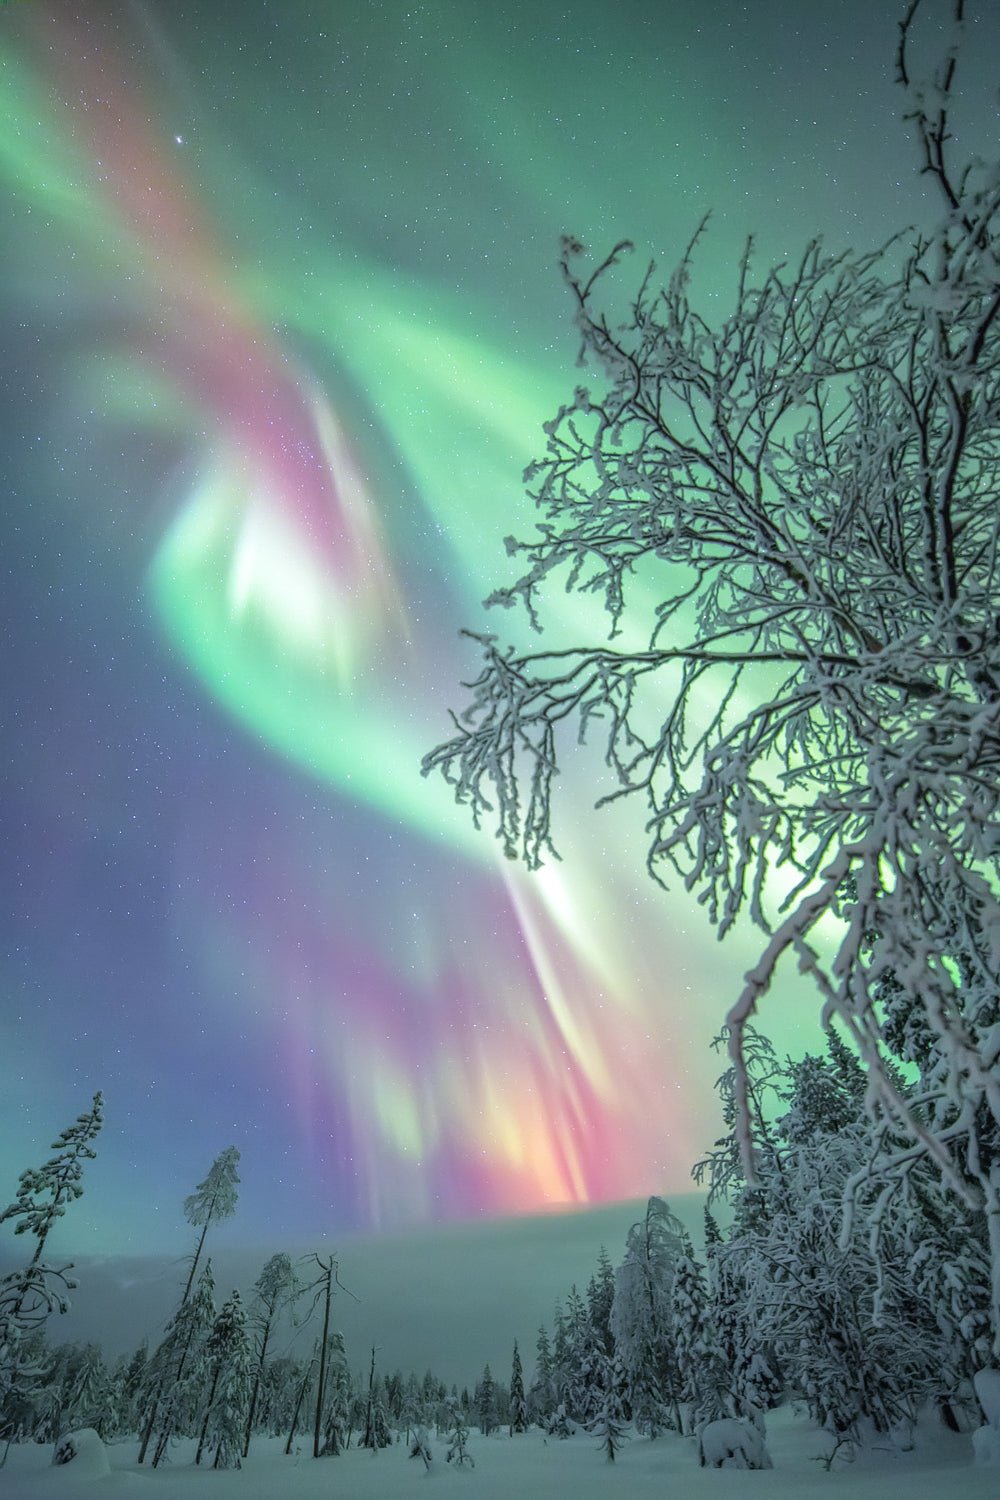 Photograph of vibrant aurora borealis lights up the winter night sky over snowy forest in remote northern wilderness.